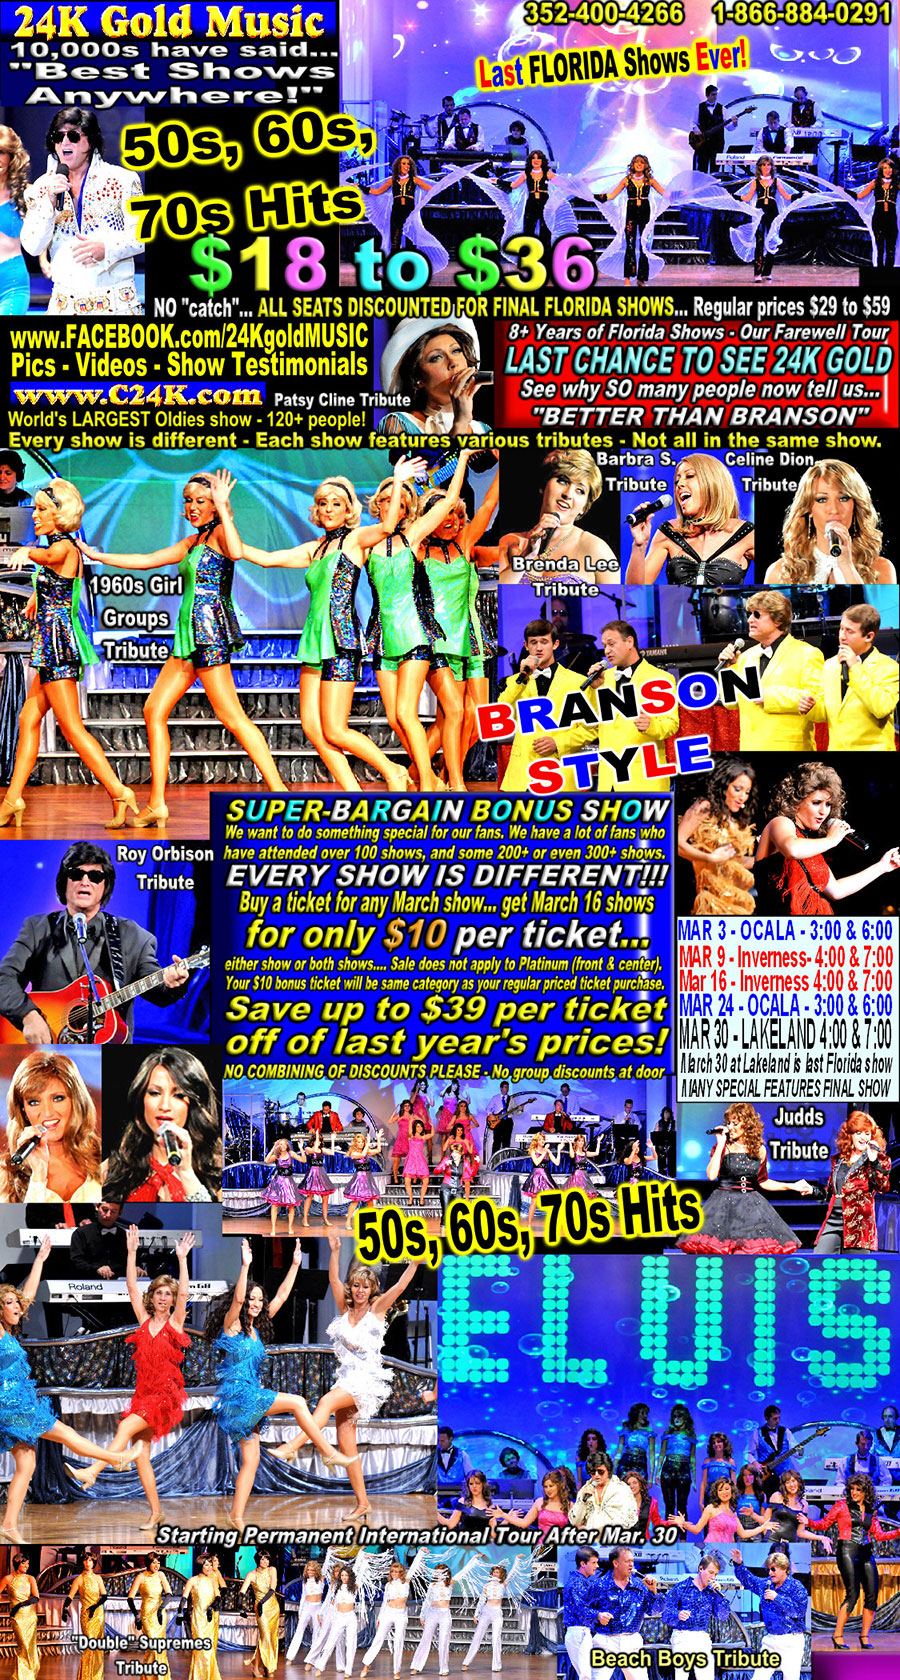 Full Size Ad - 24K Gold Music Shows - Last Show Schedule in Florida!!!